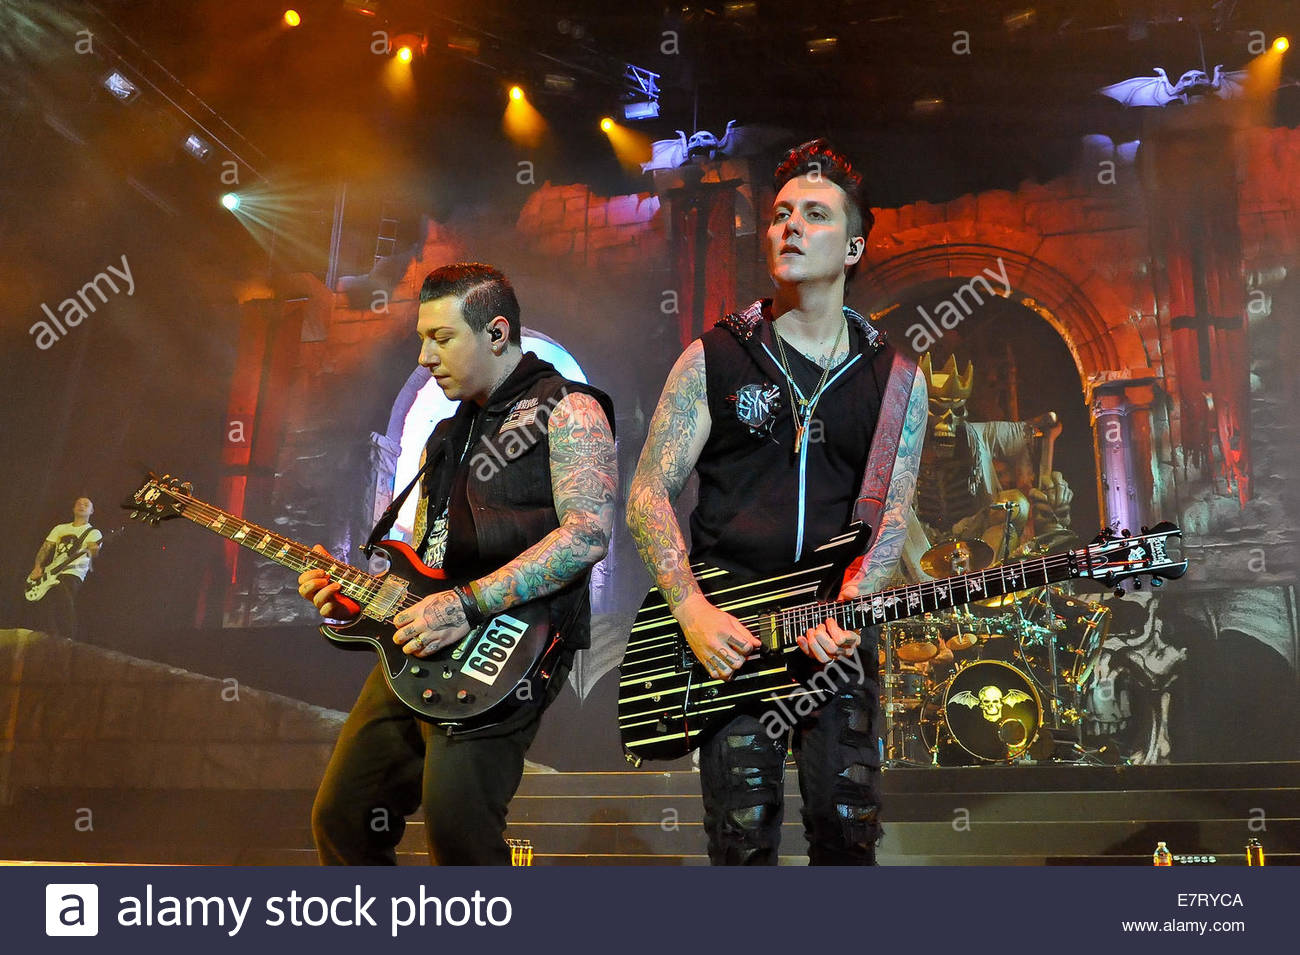 Zacky Vengeance L and Synyster Gates with Avenged